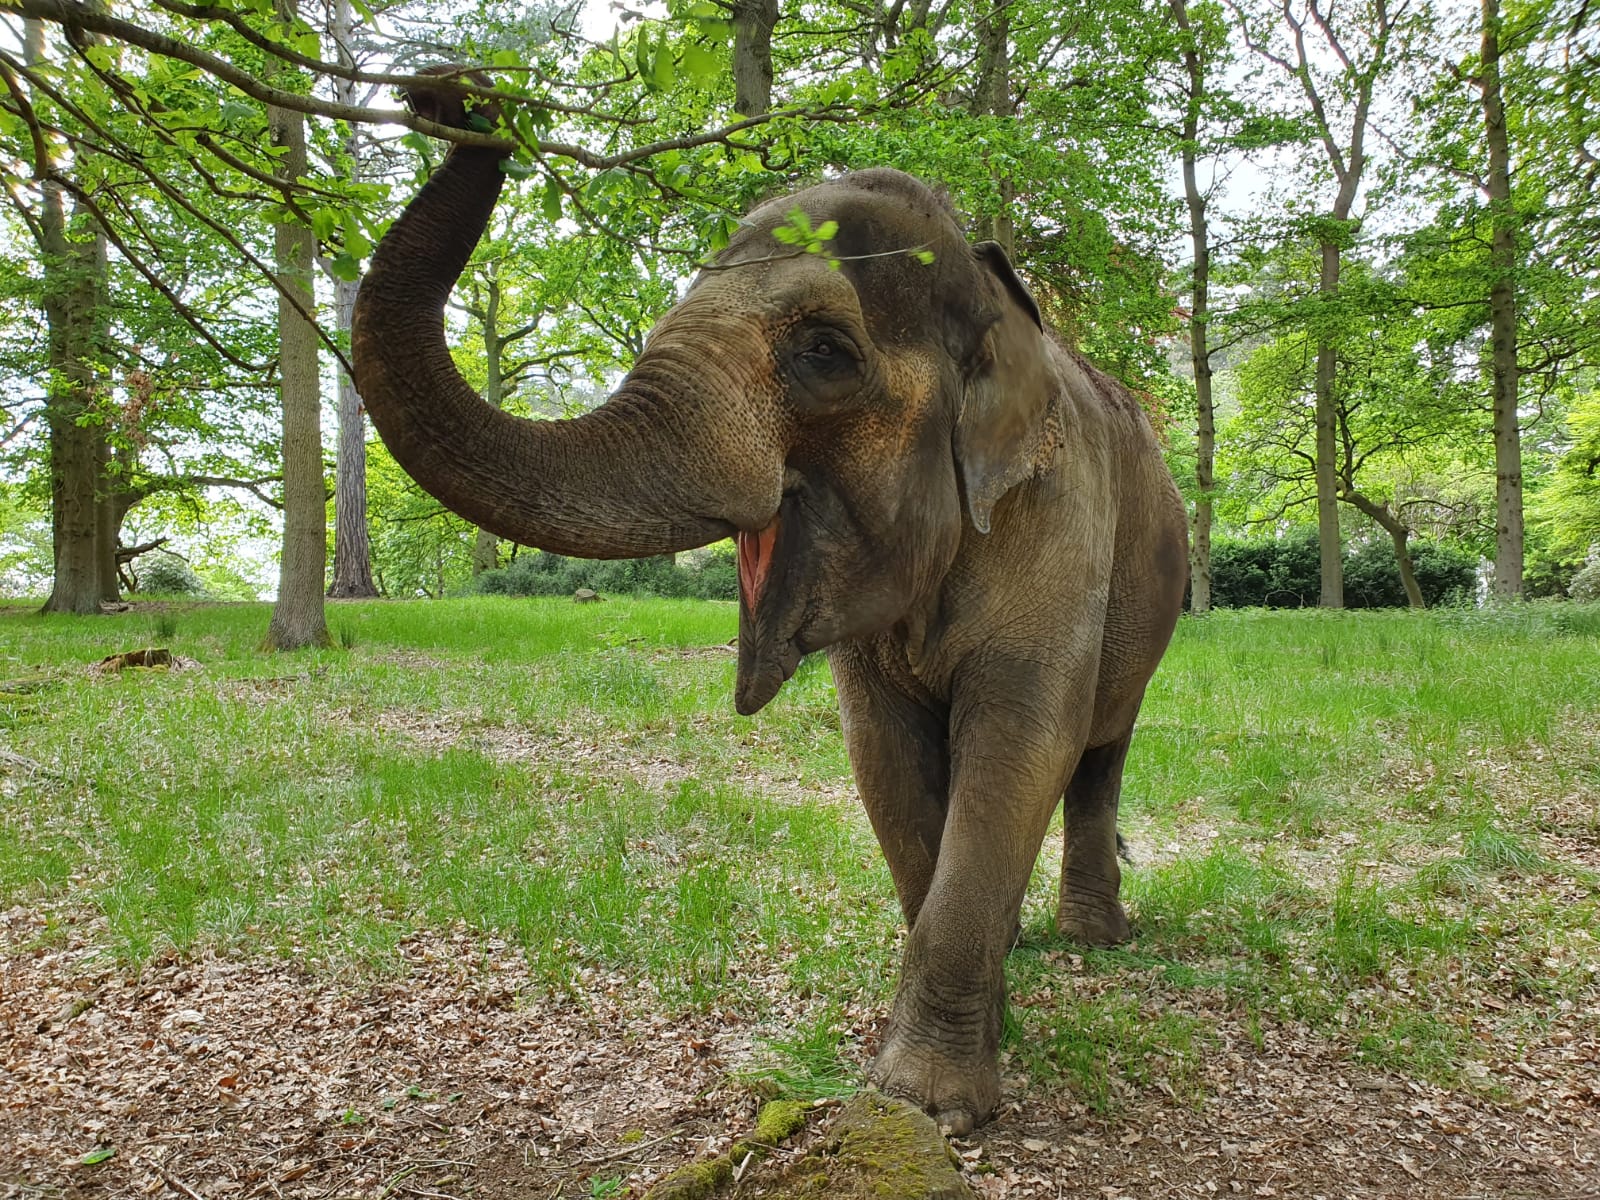 Elephant stretches up to eat leaves from tree in forest